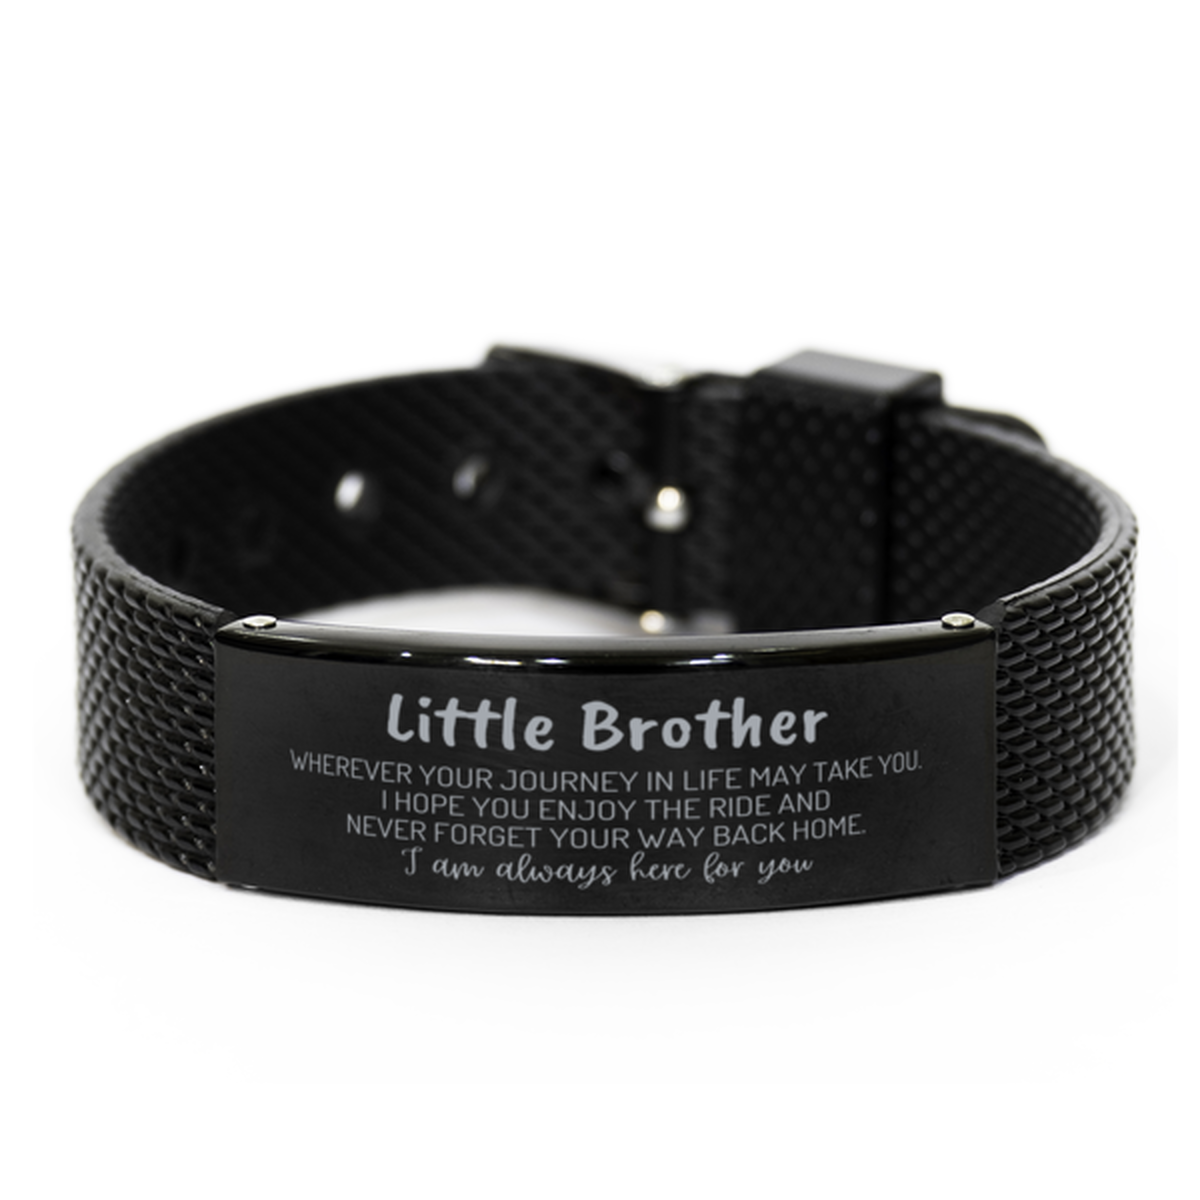 Little Brother wherever your journey in life may take you, I am always here for you Little Brother Black Shark Mesh Bracelet, Awesome Christmas Gifts For Little Brother, Little Brother Birthday Gifts for Men Women Family Loved One